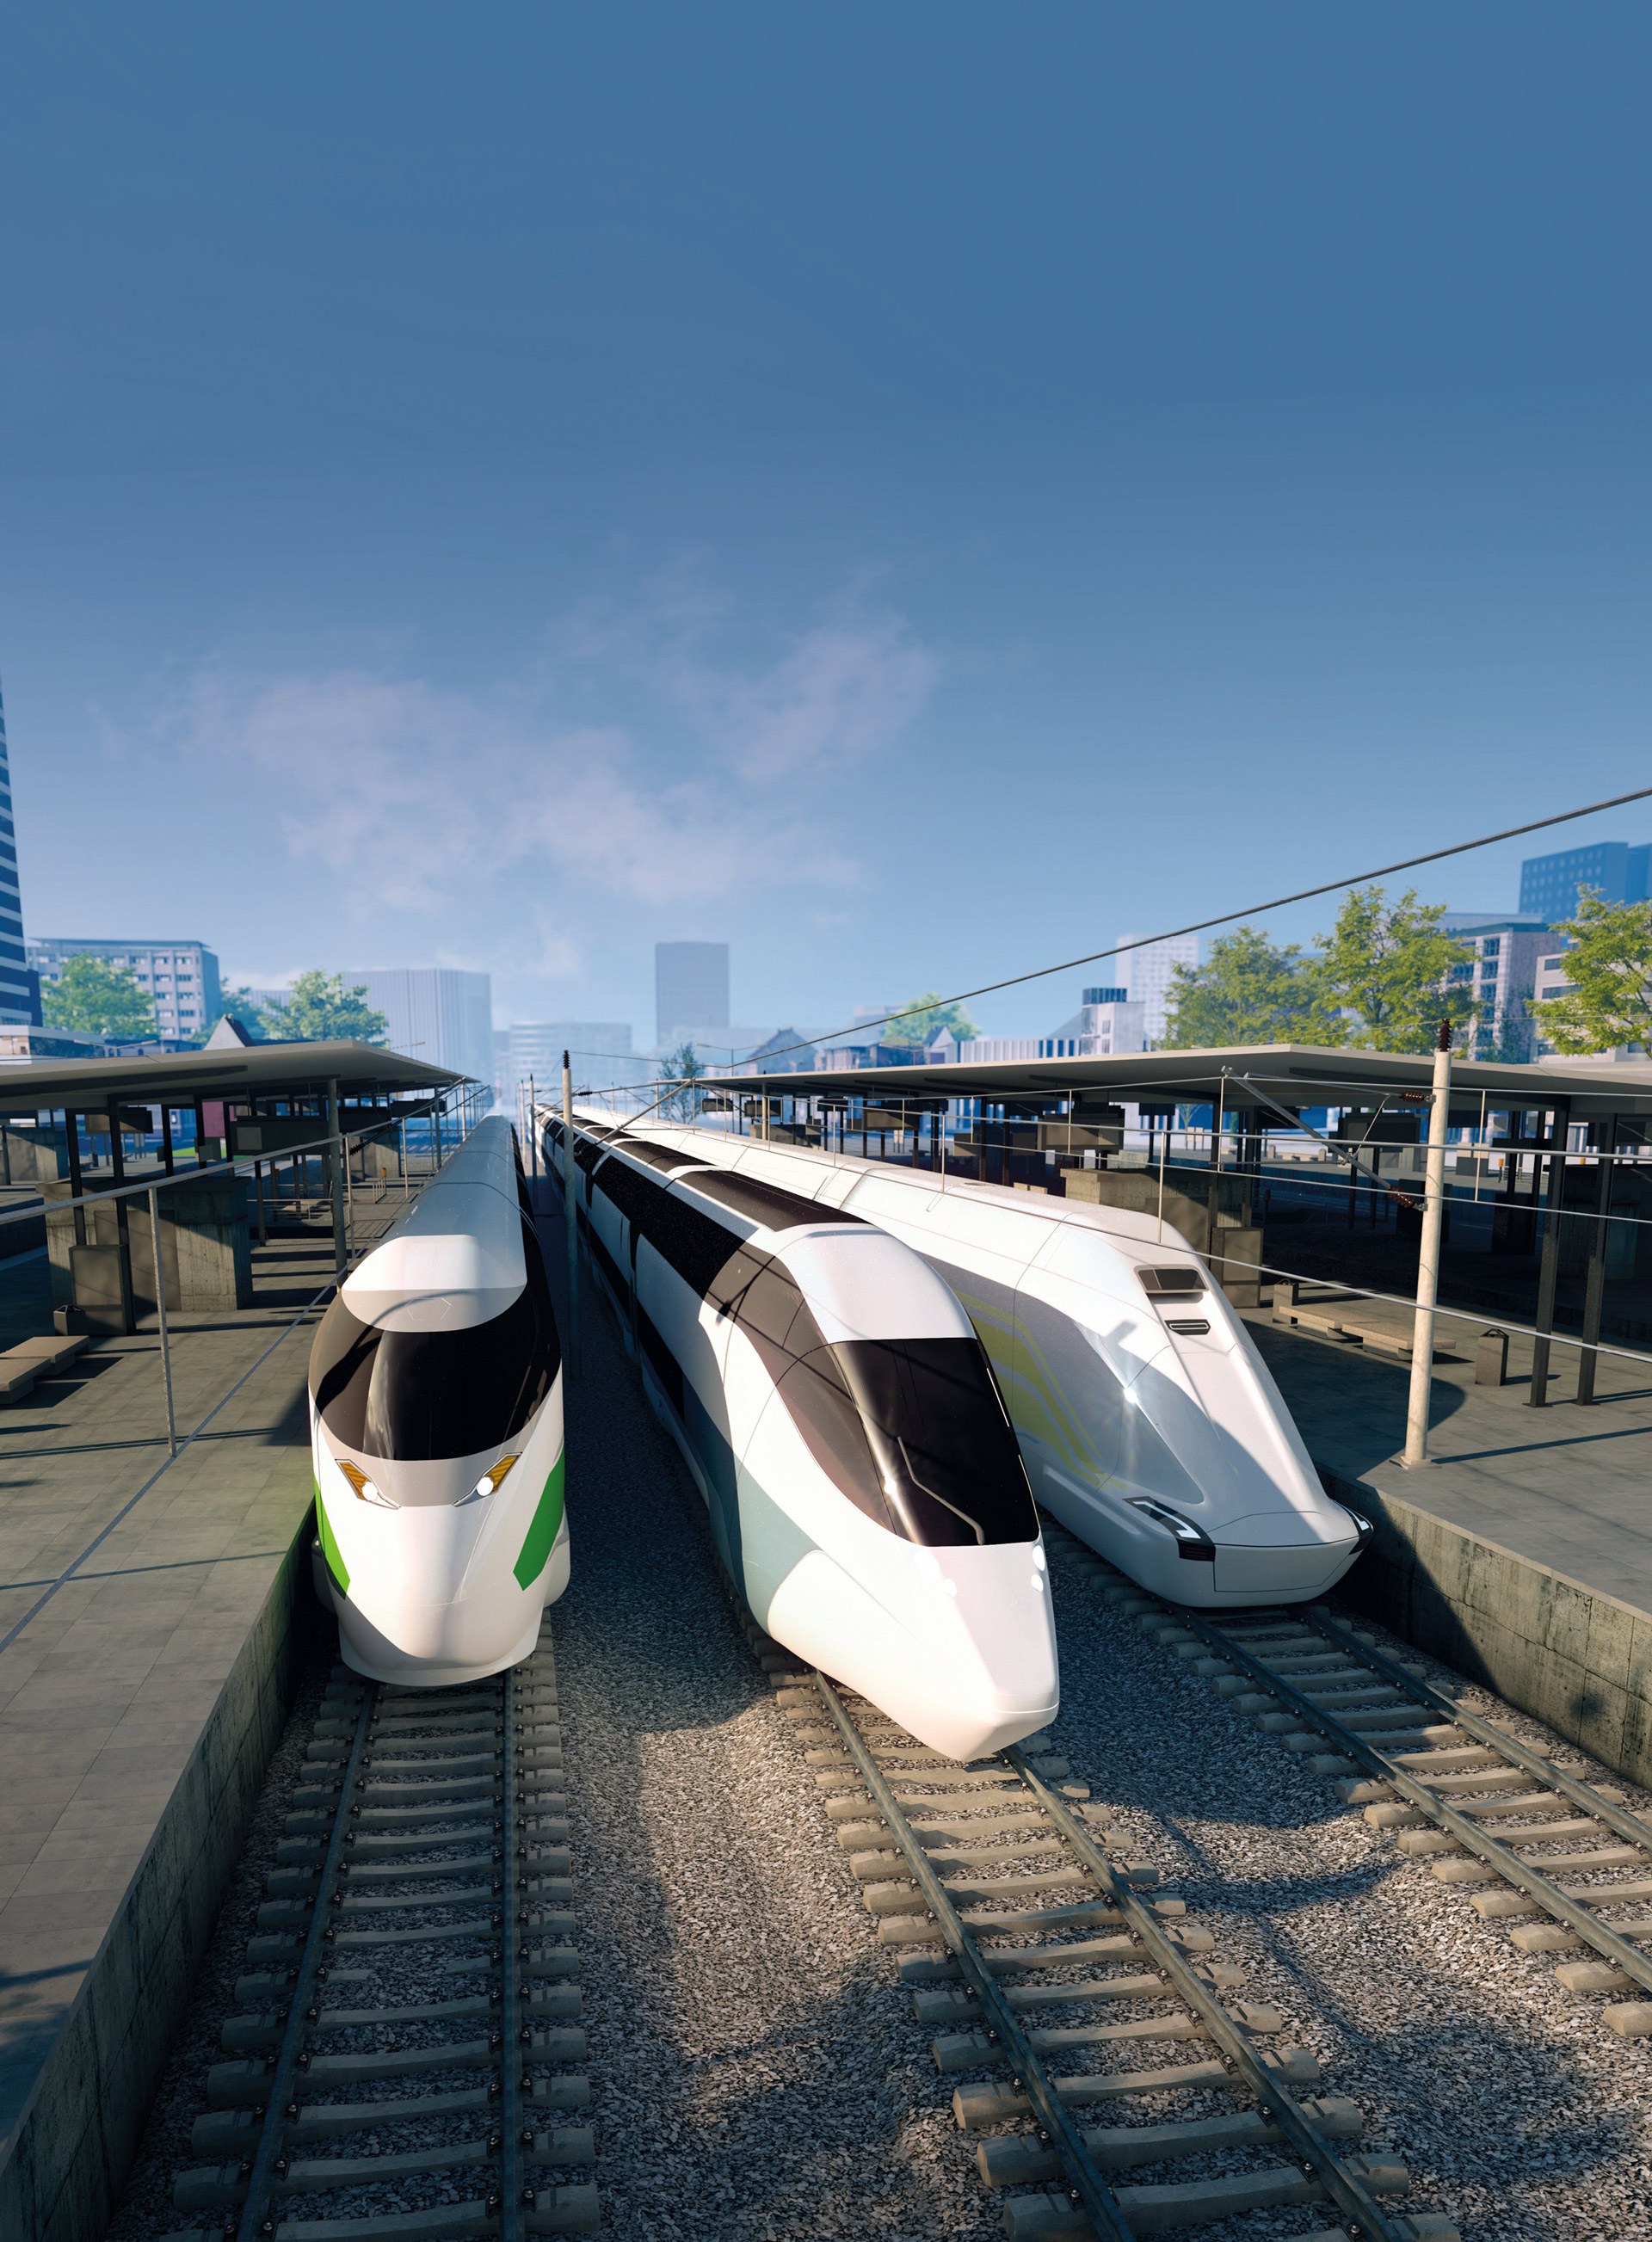 New concepts for future rail transport